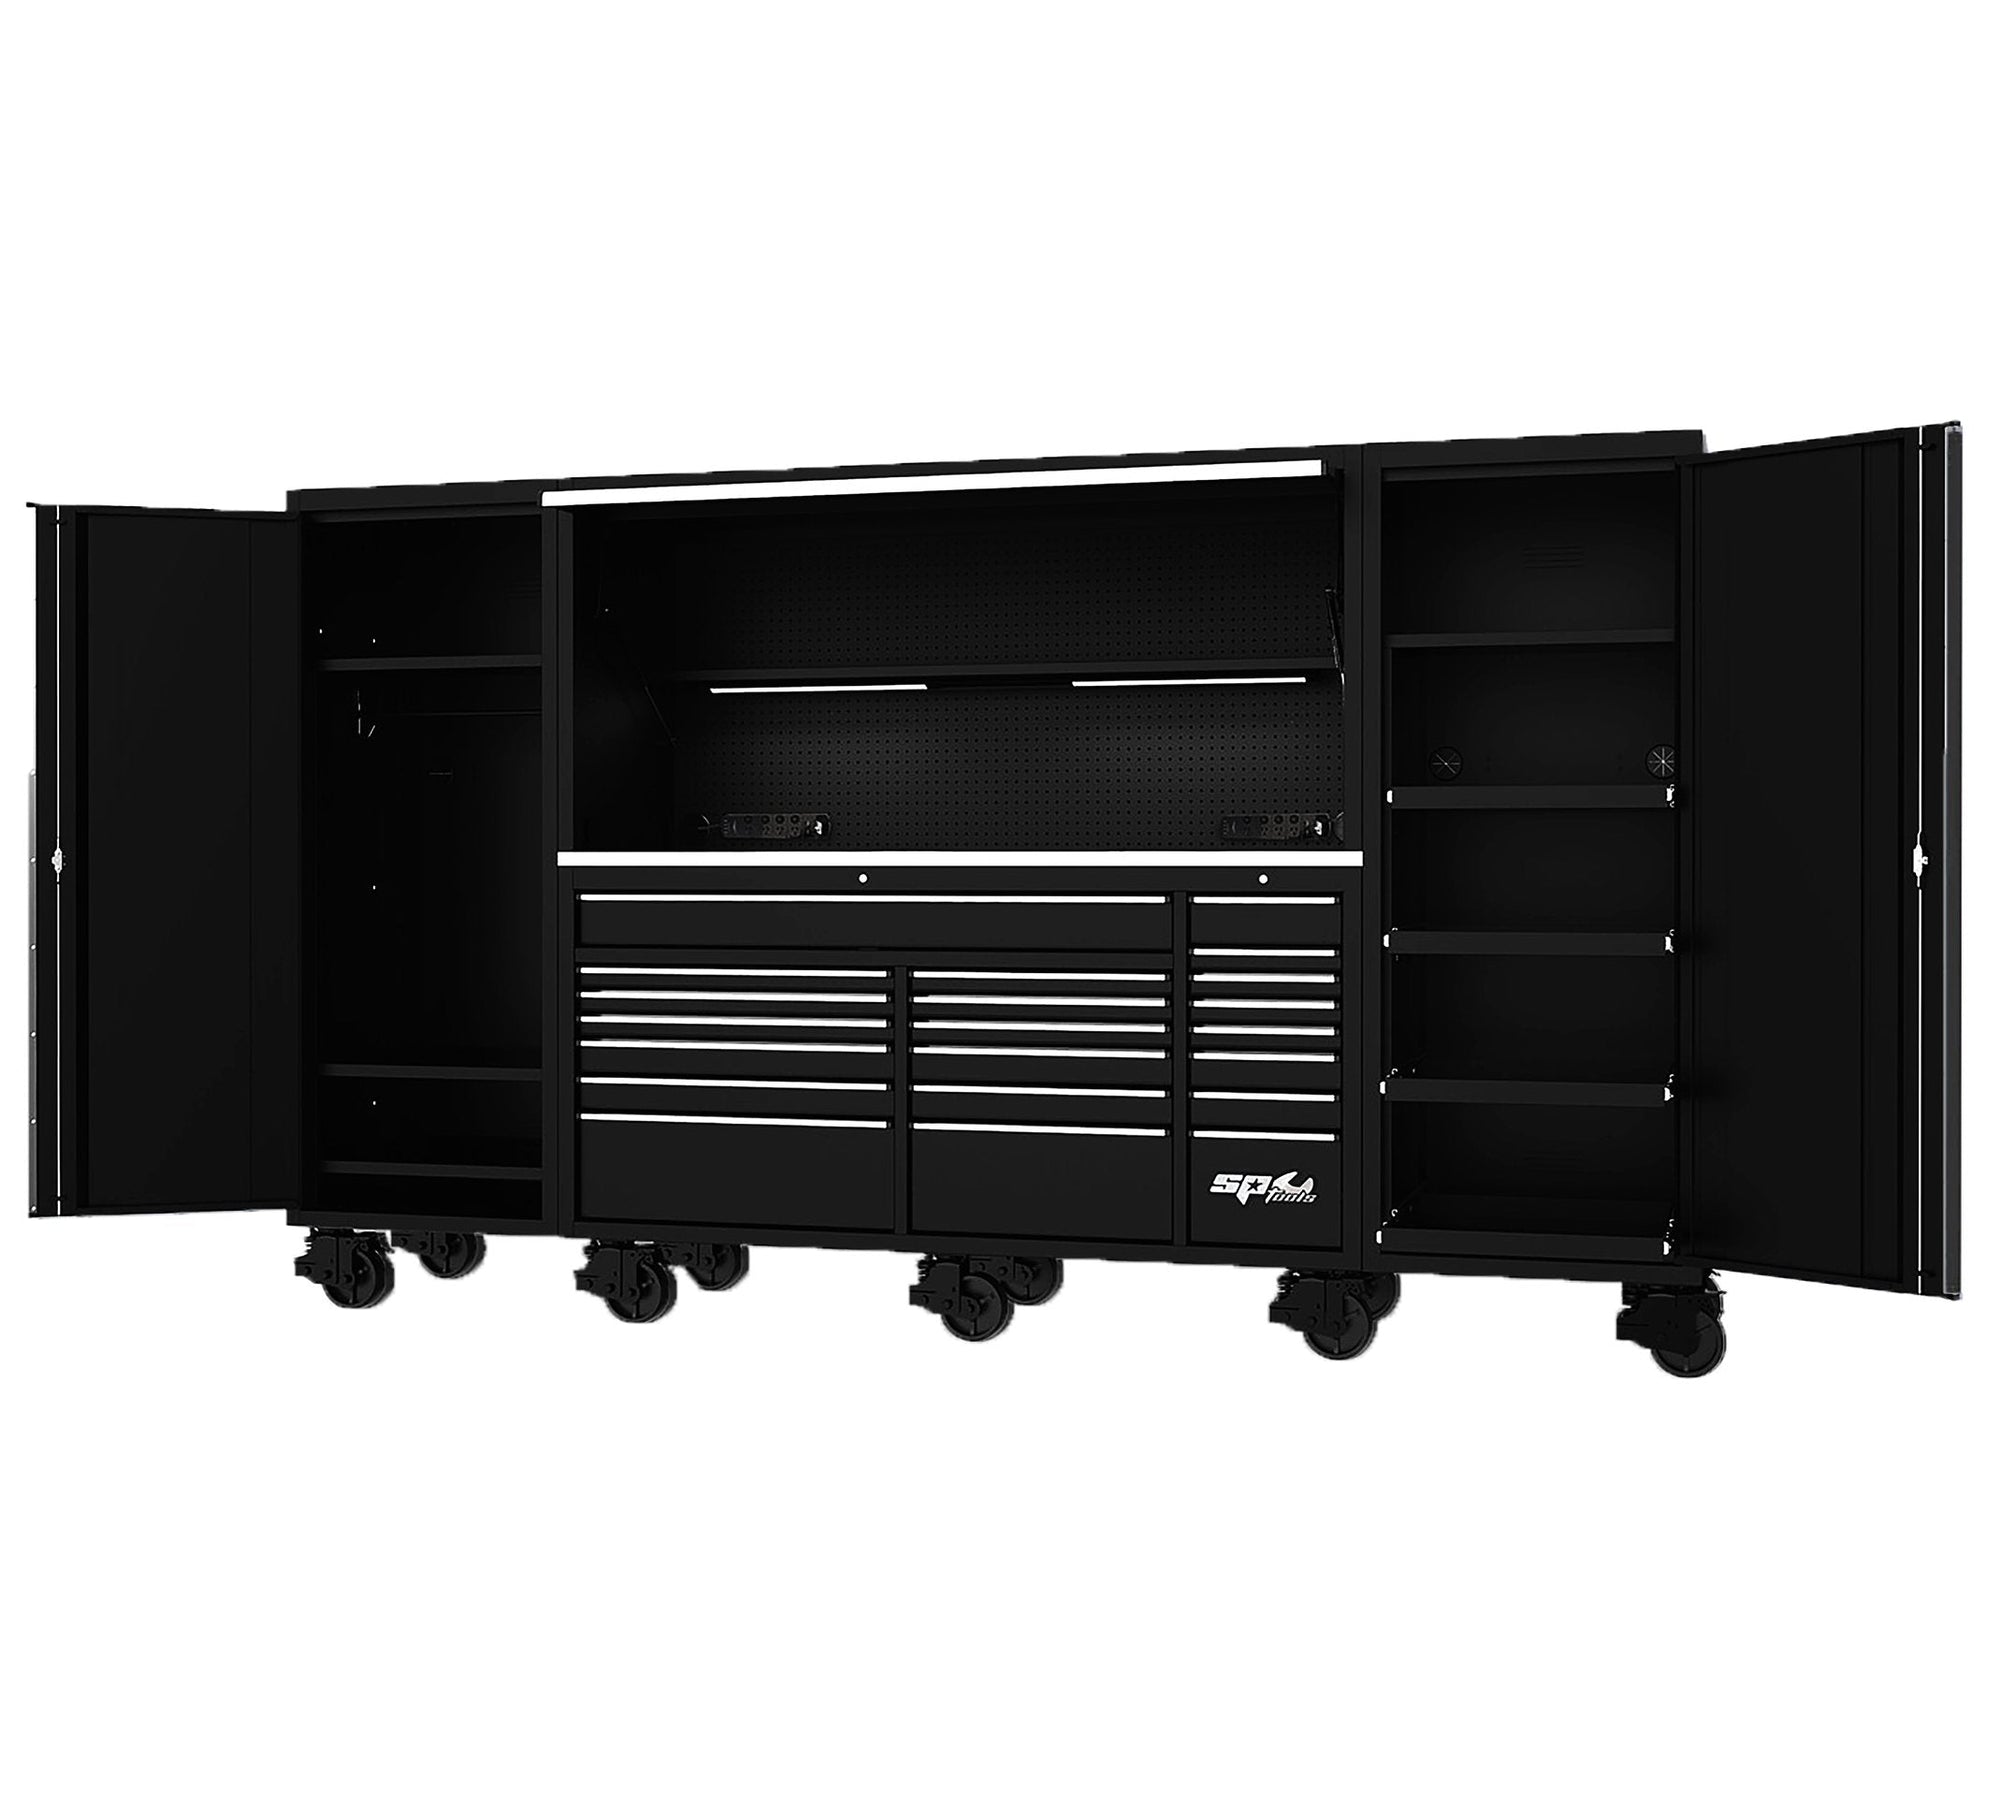 128" USA SUMO SERIES COMPLETE WORKSTATION